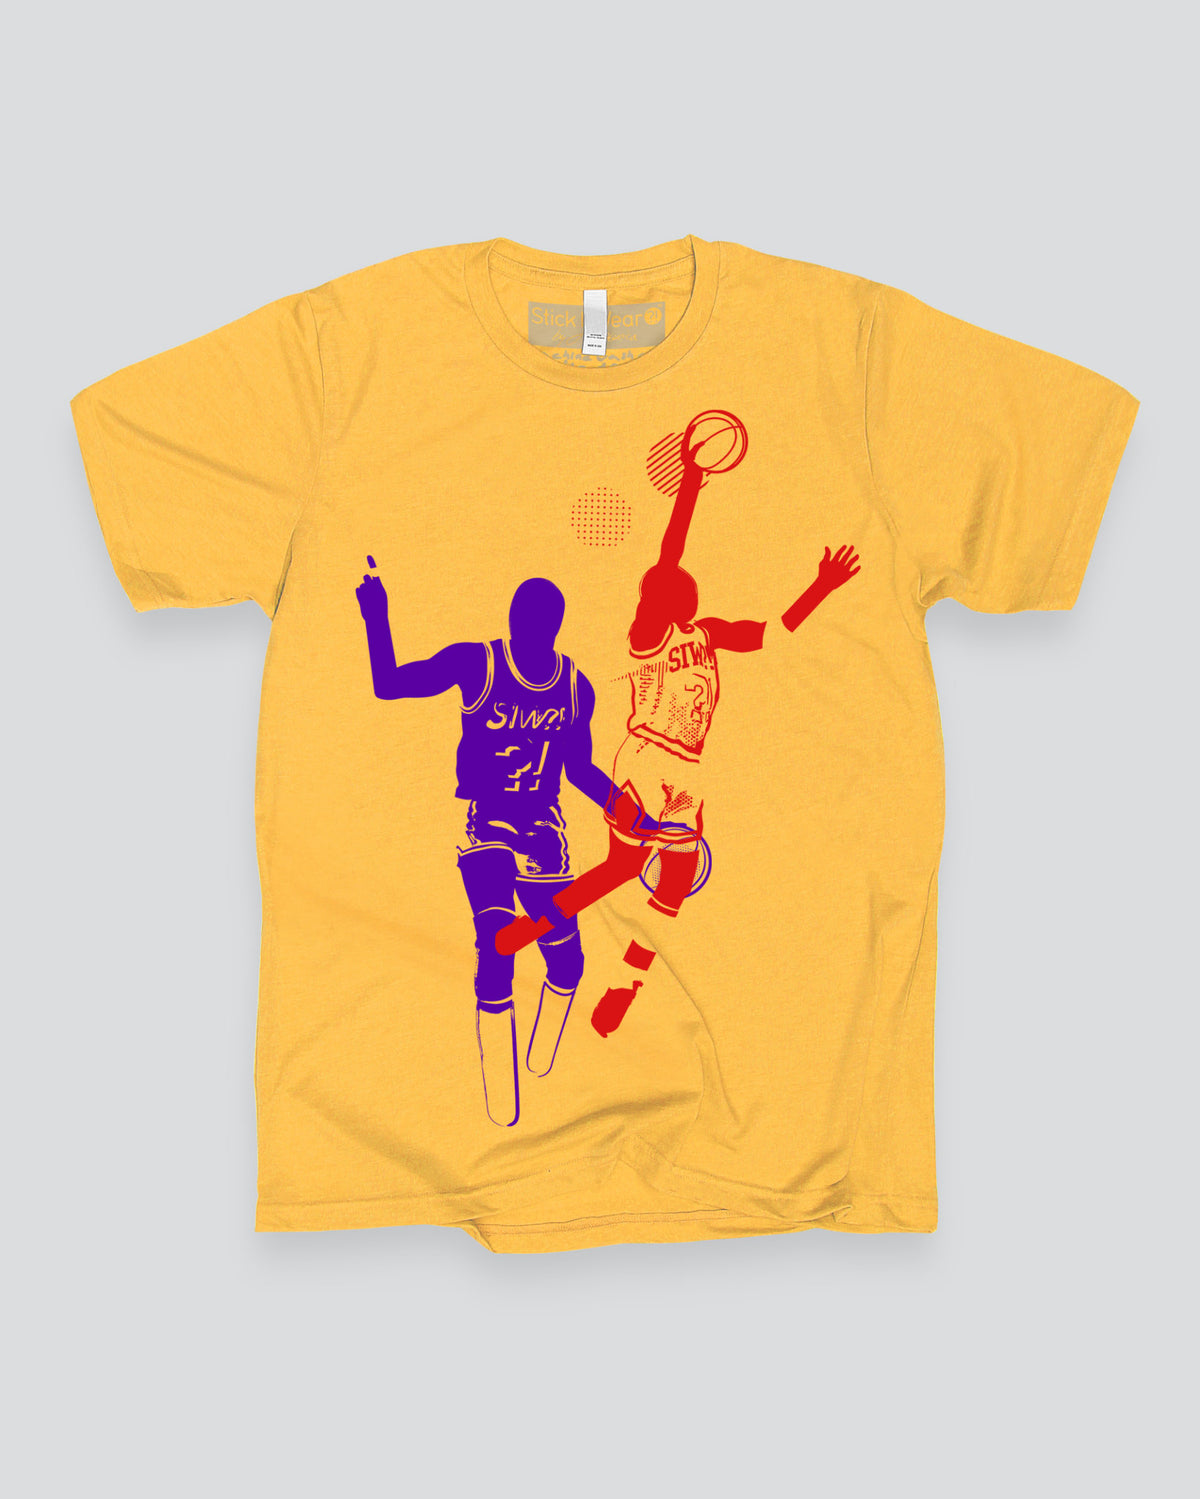 A SPECTACULAR MOVE 01 Basketball Stance T-Shirt